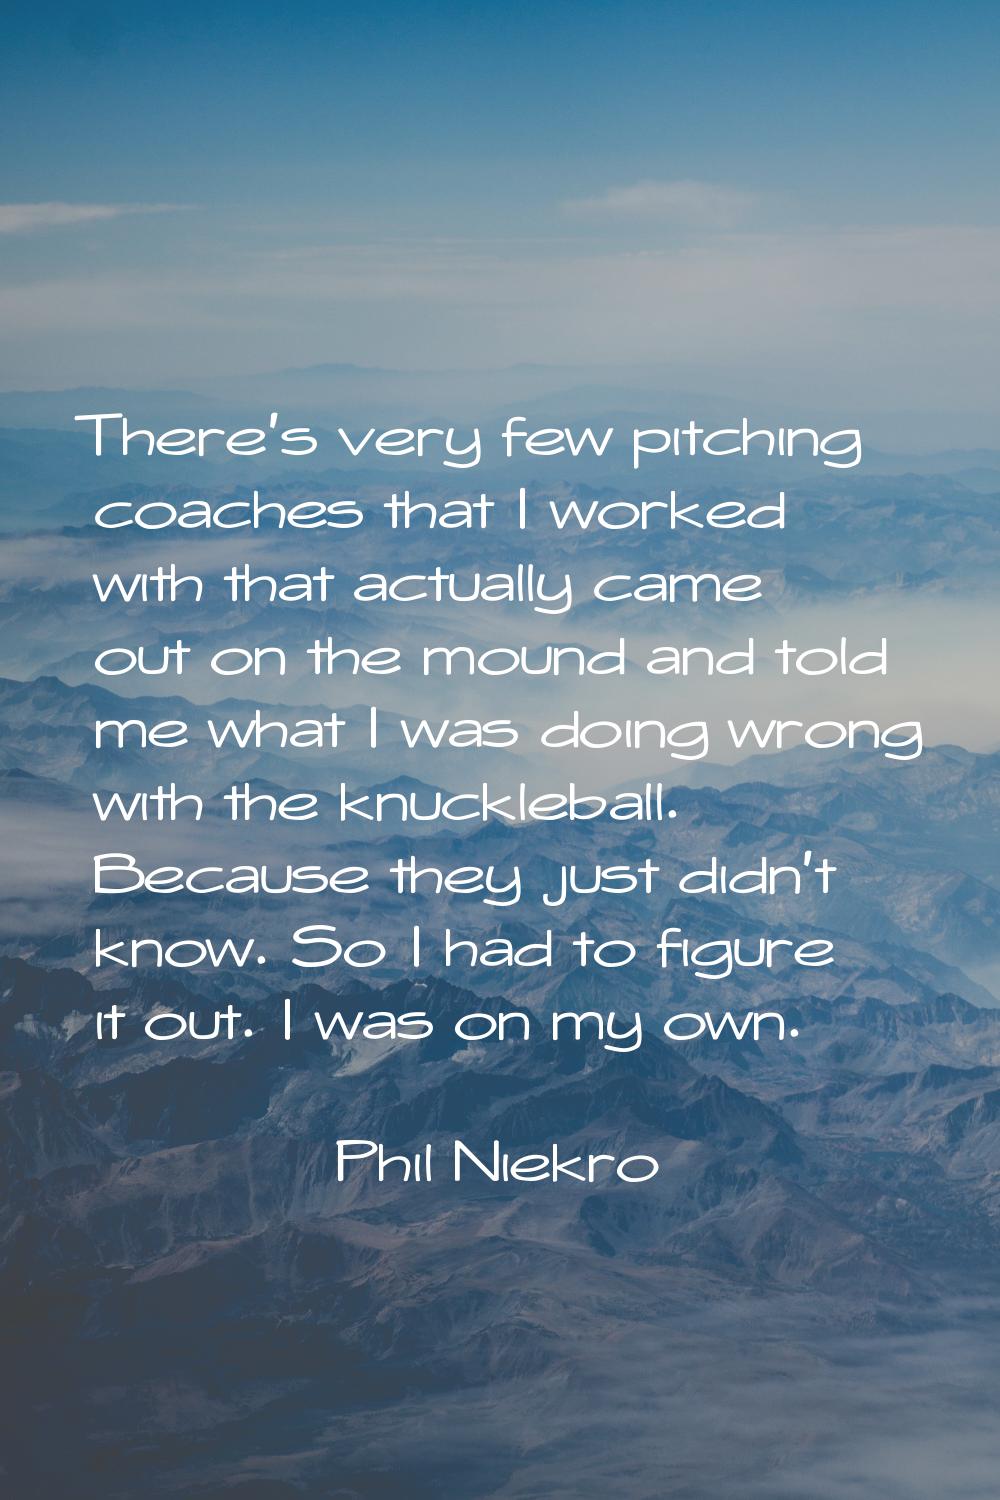 There's very few pitching coaches that I worked with that actually came out on the mound and told m